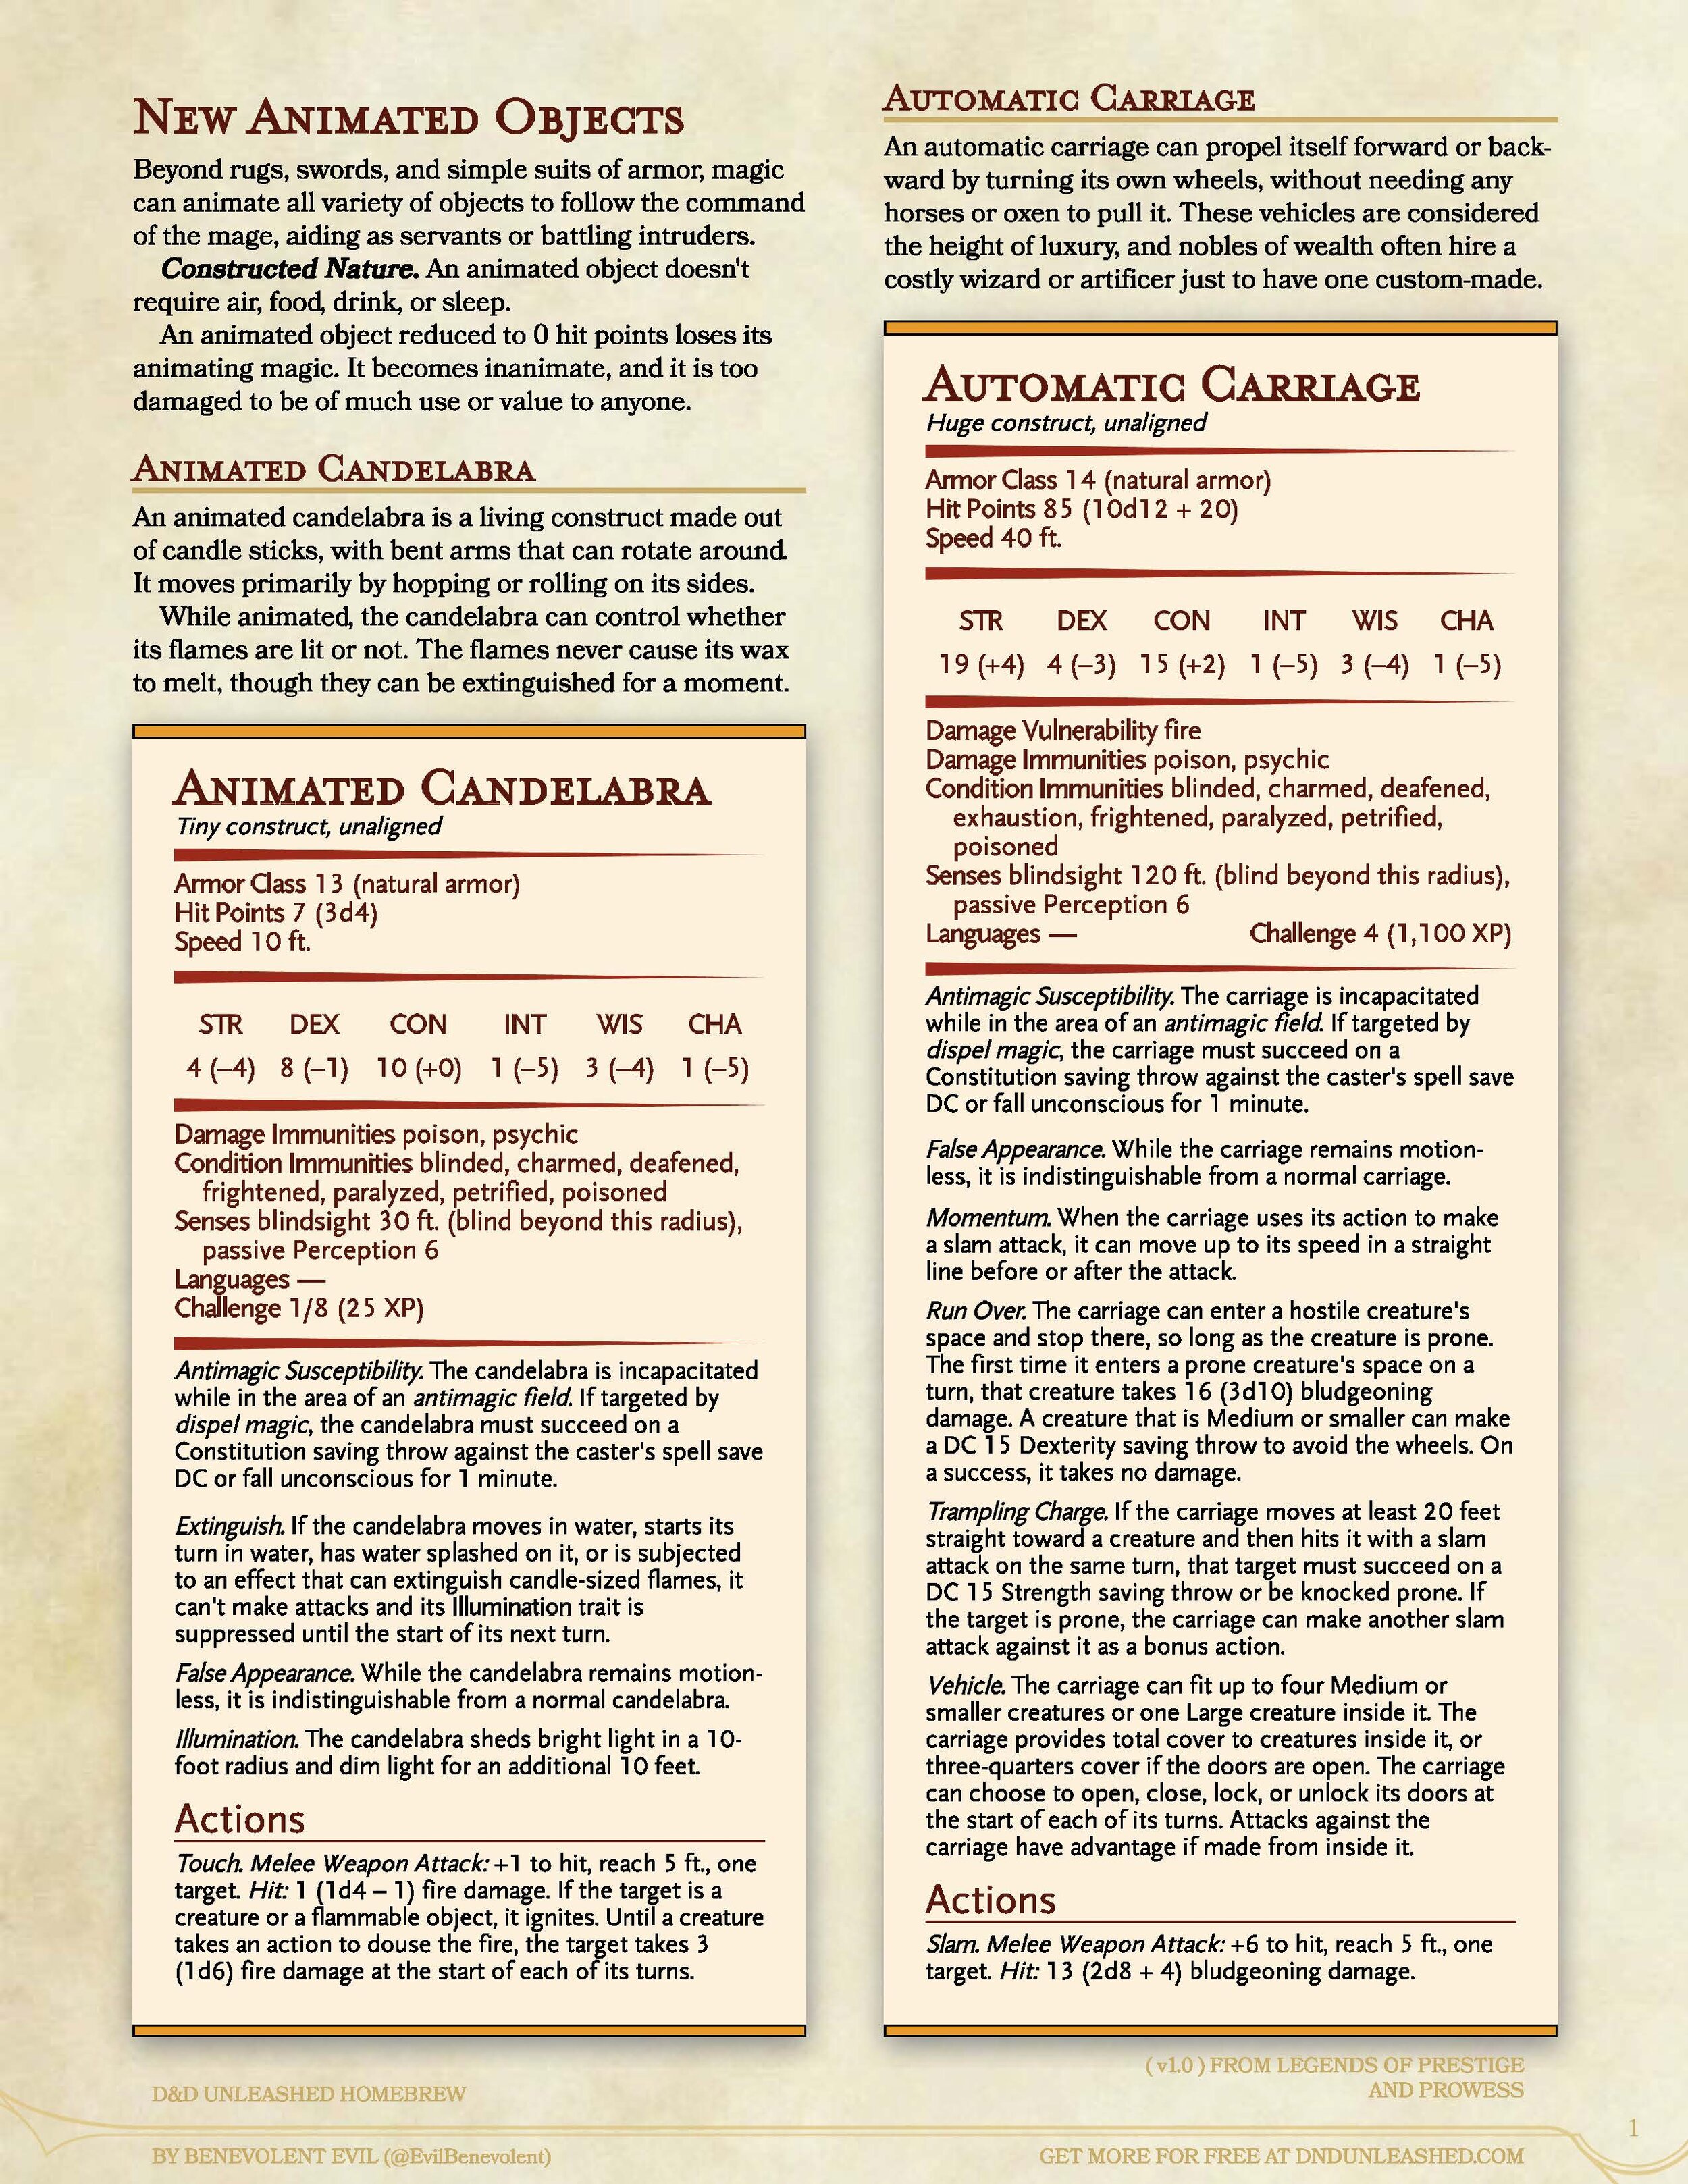 D&D Unleashed - New Animated Objects (1p0)_Page_1.jpg